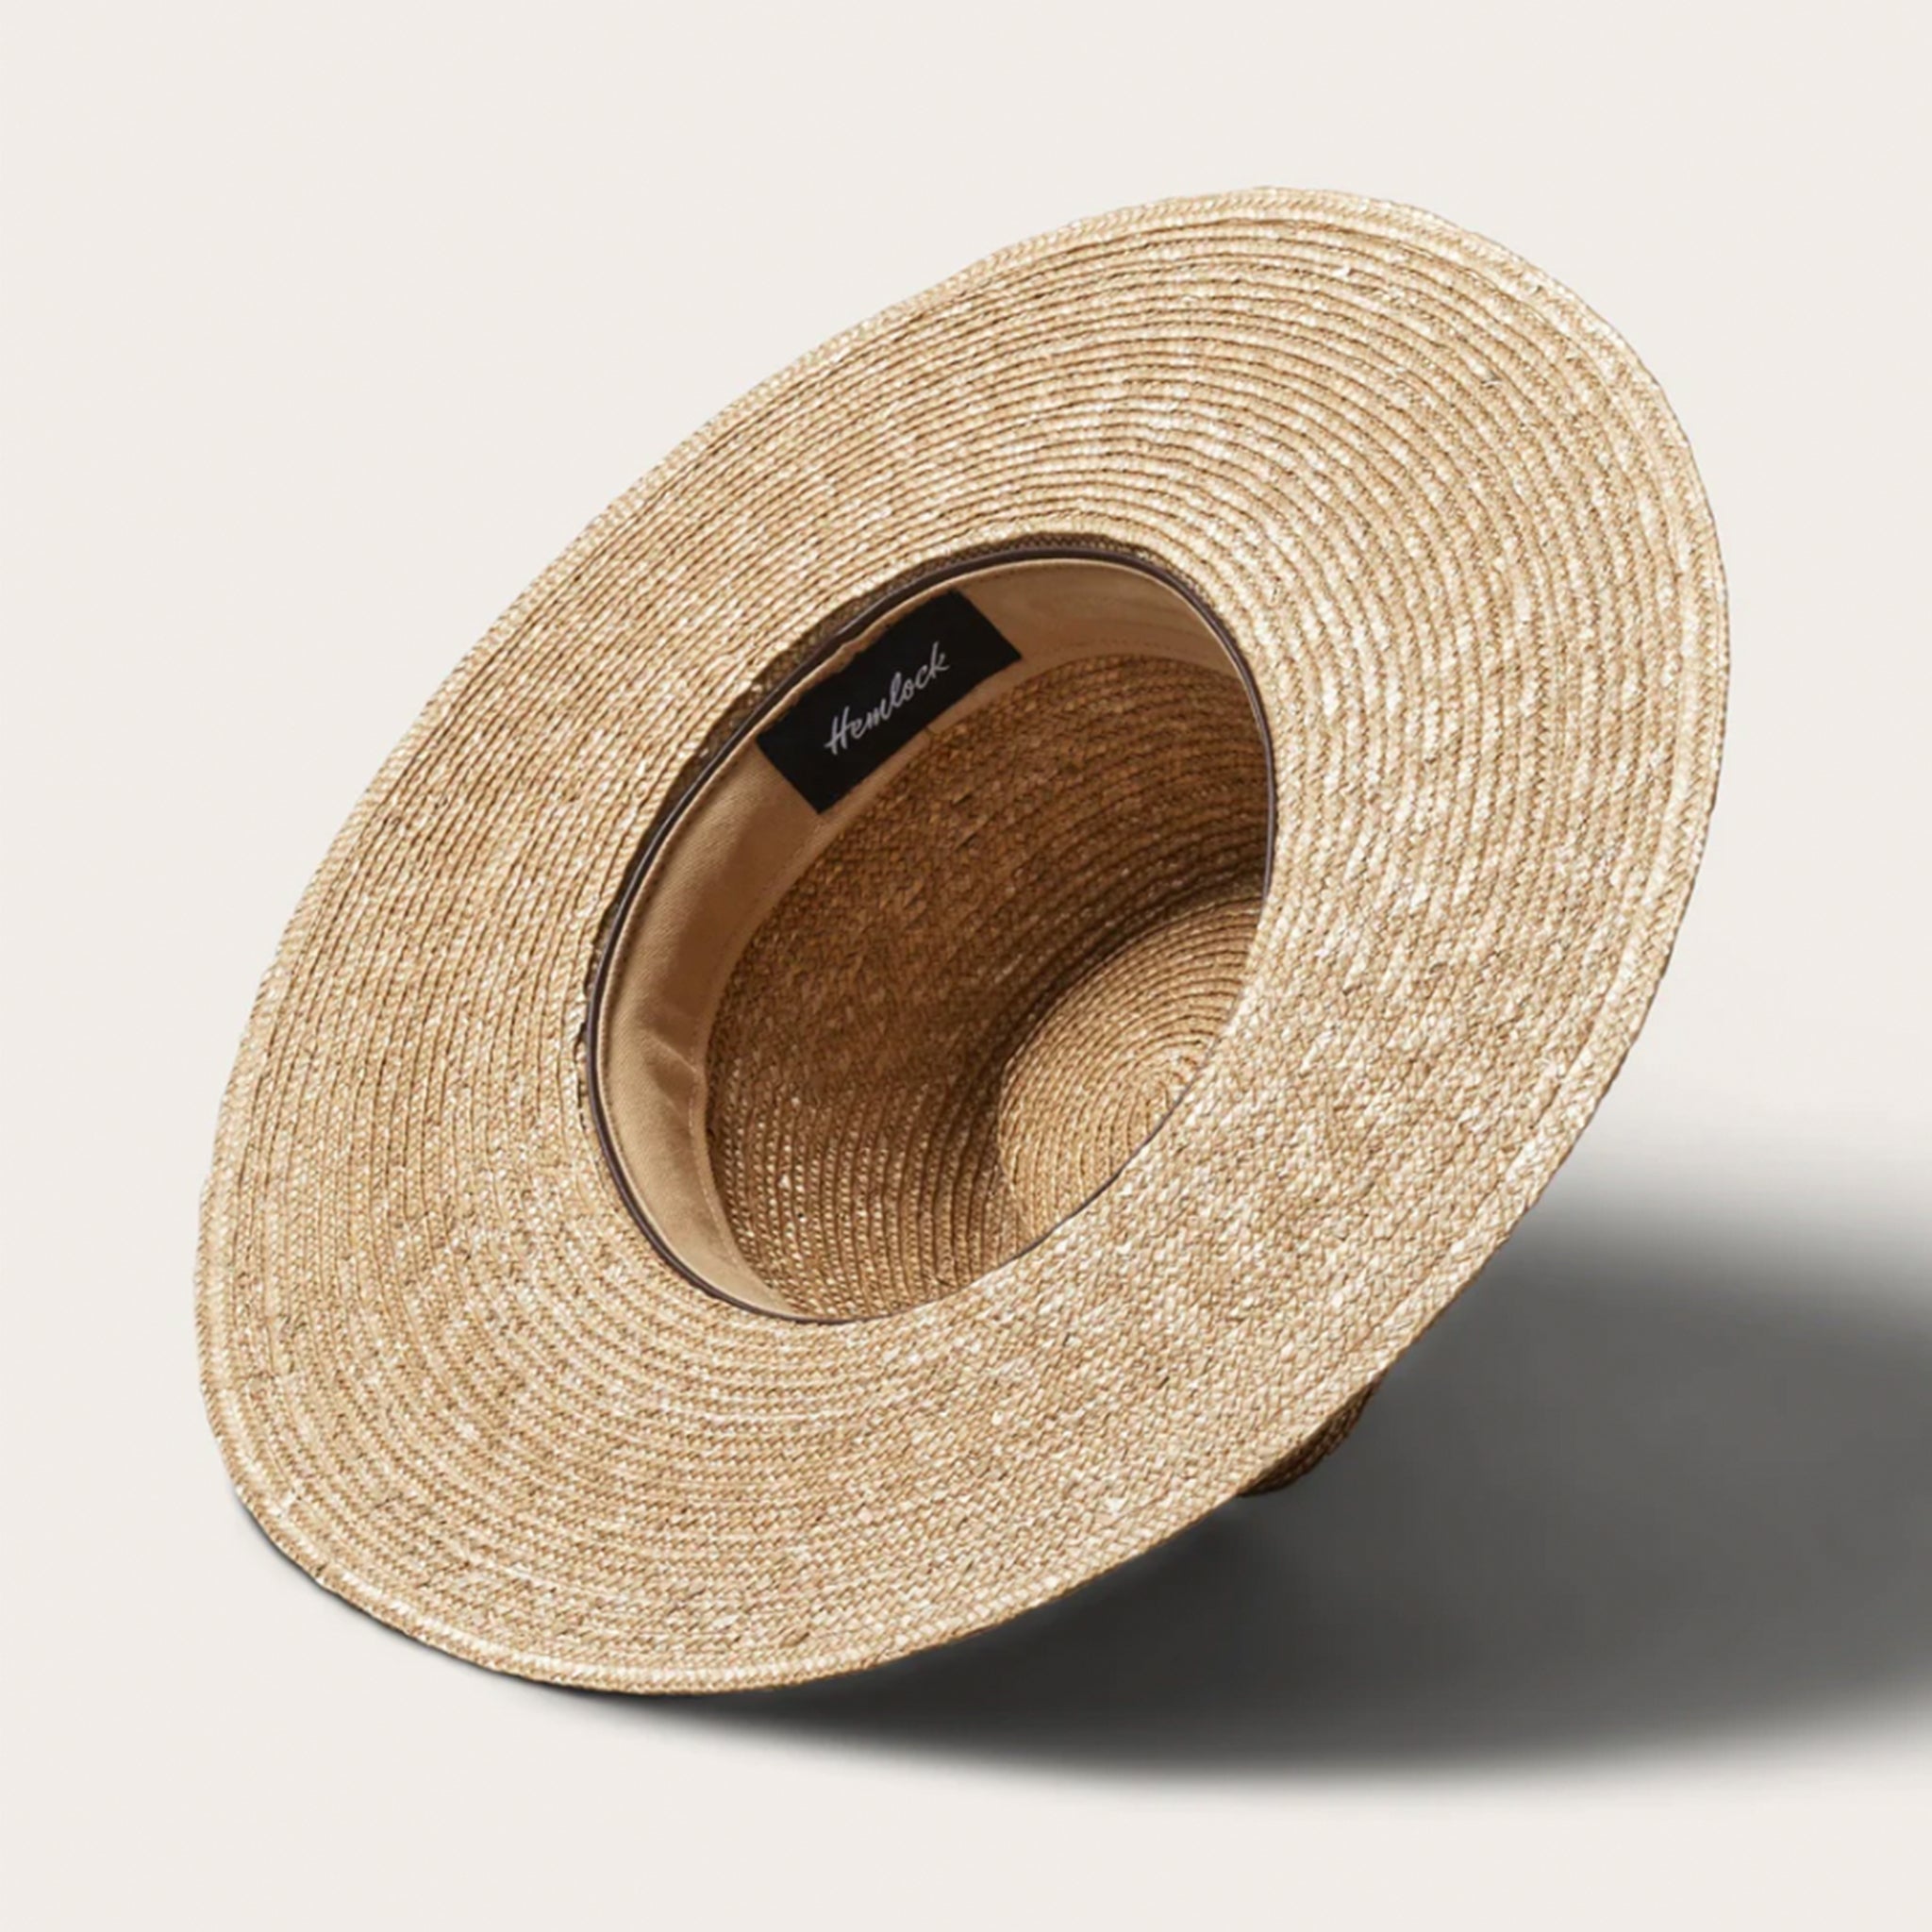 On a white background is a tan woven sun hat with a band around the base of the hat.